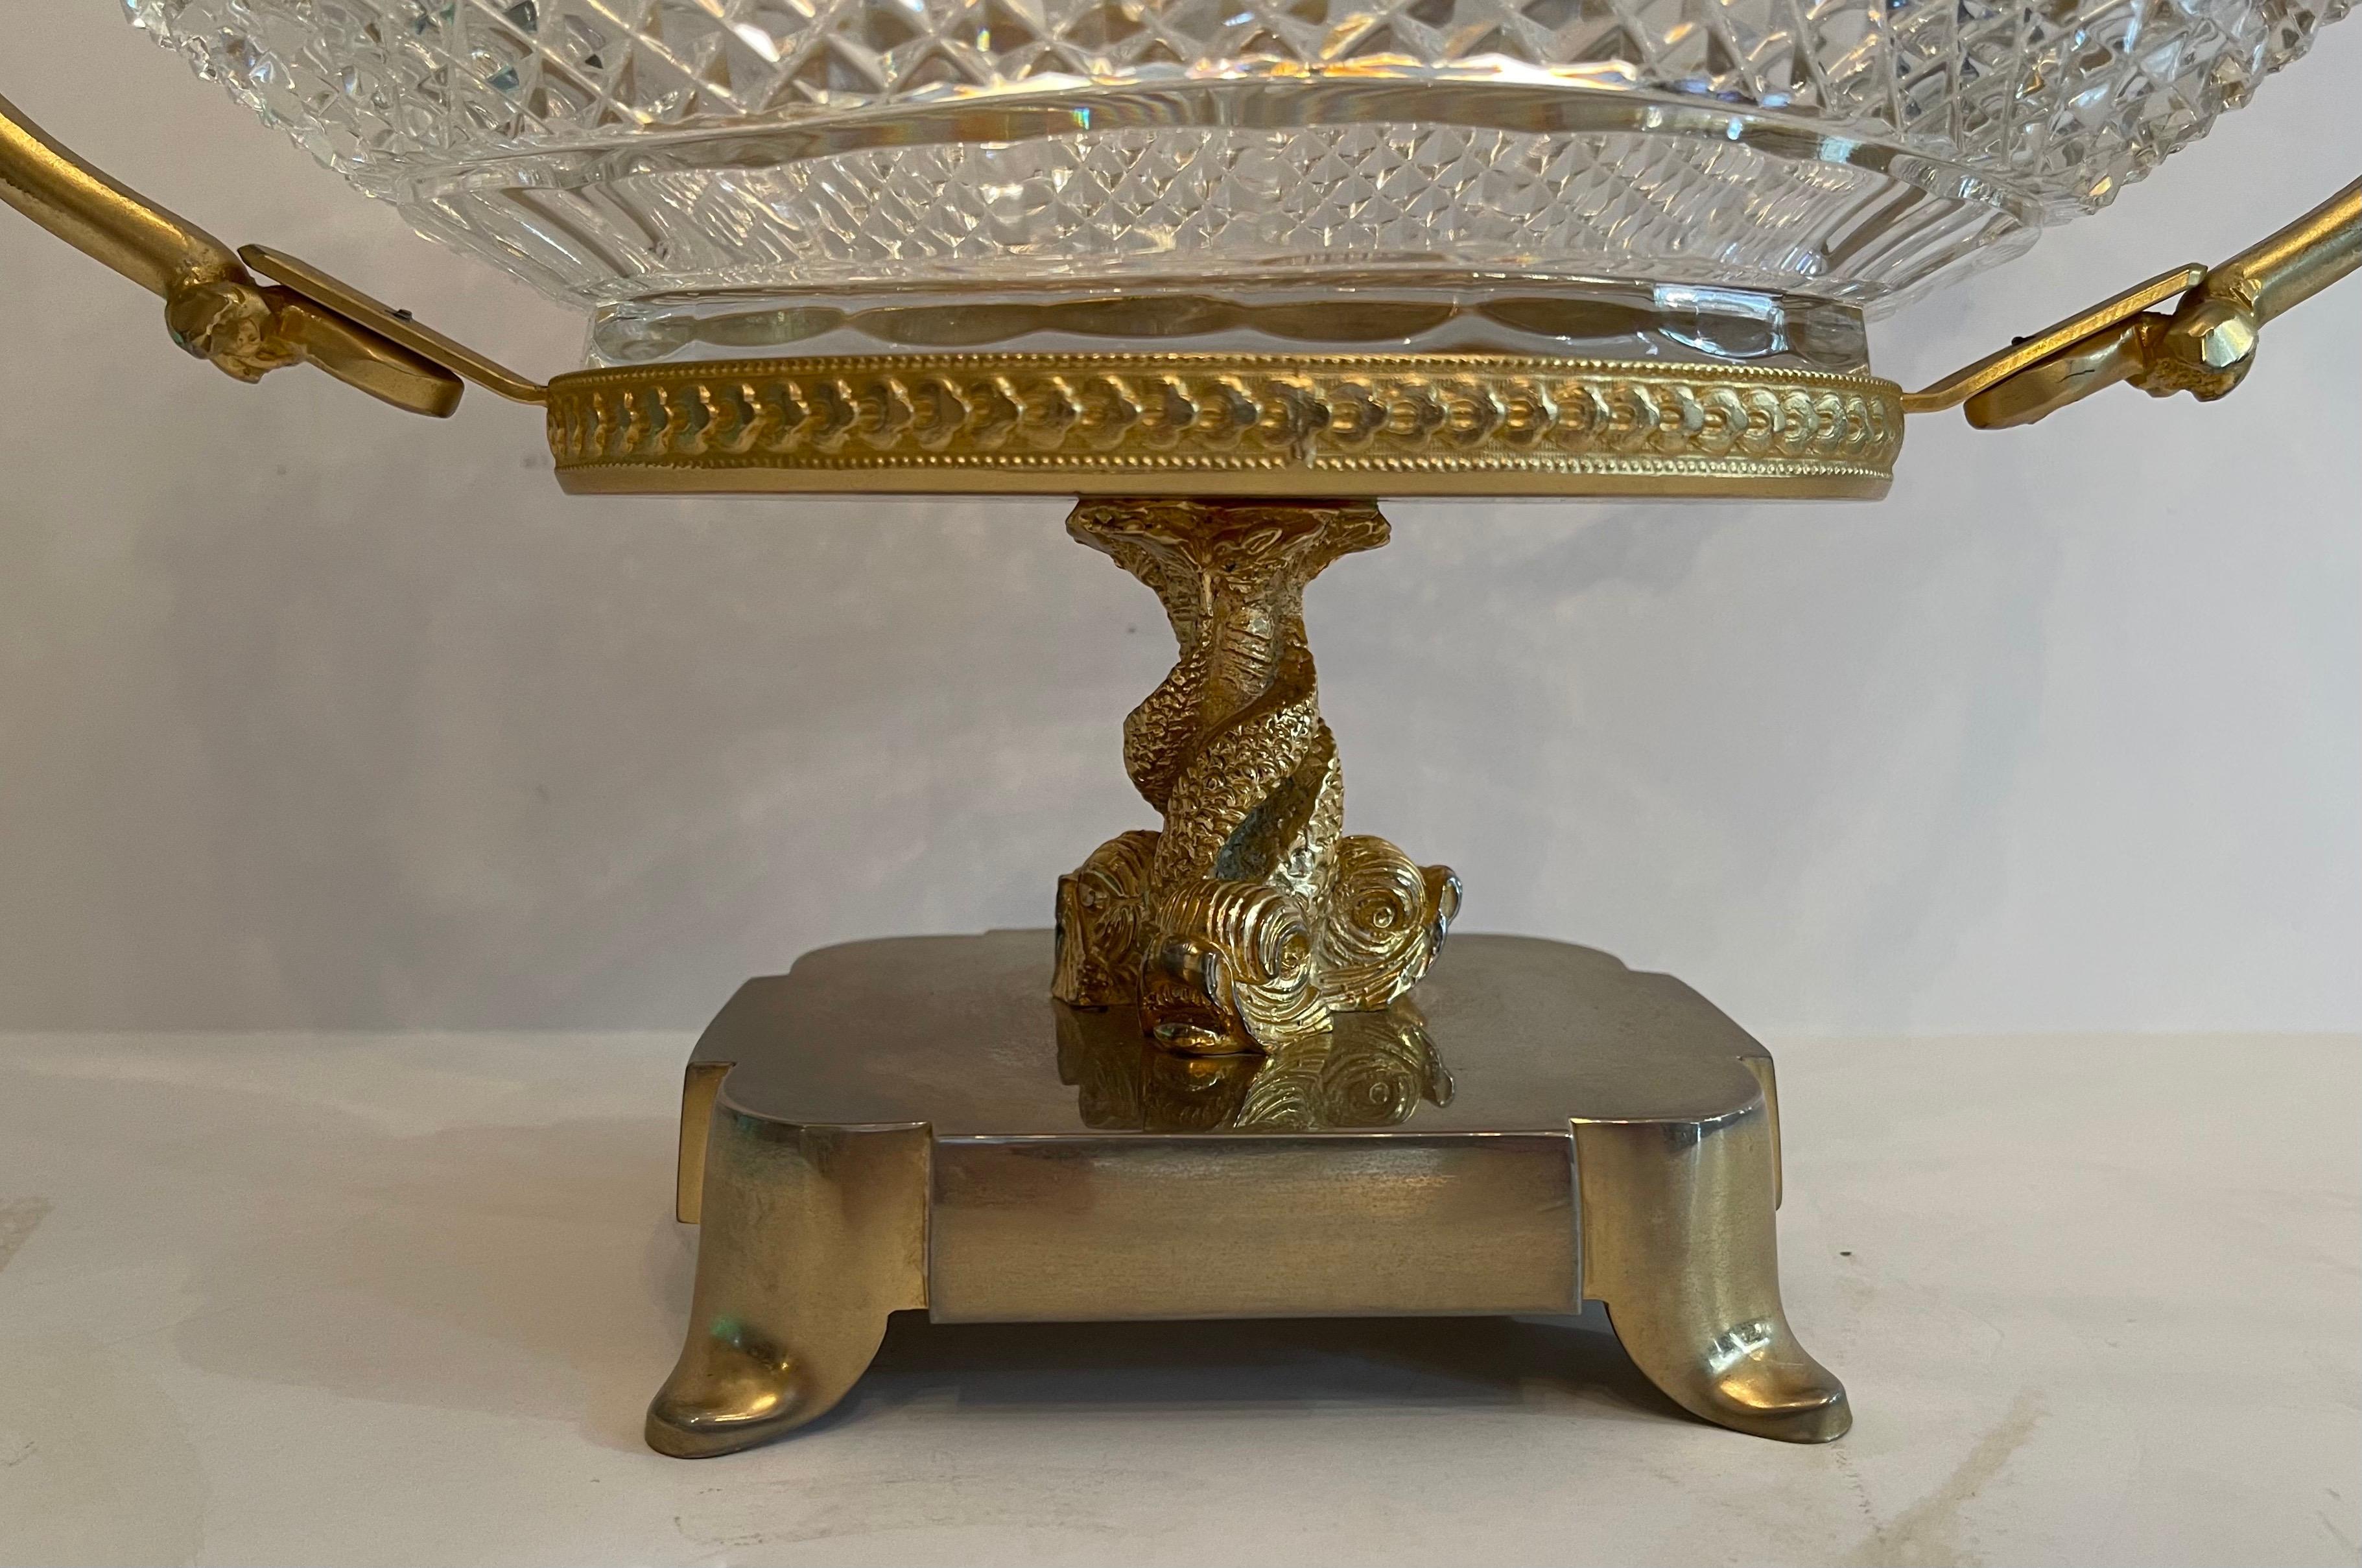 A Wonderful Baccarat style French cherub / putti gilt bronze ormolu centerpiece with faceted crystal insert bowl built up on intertwined Dolphin base.